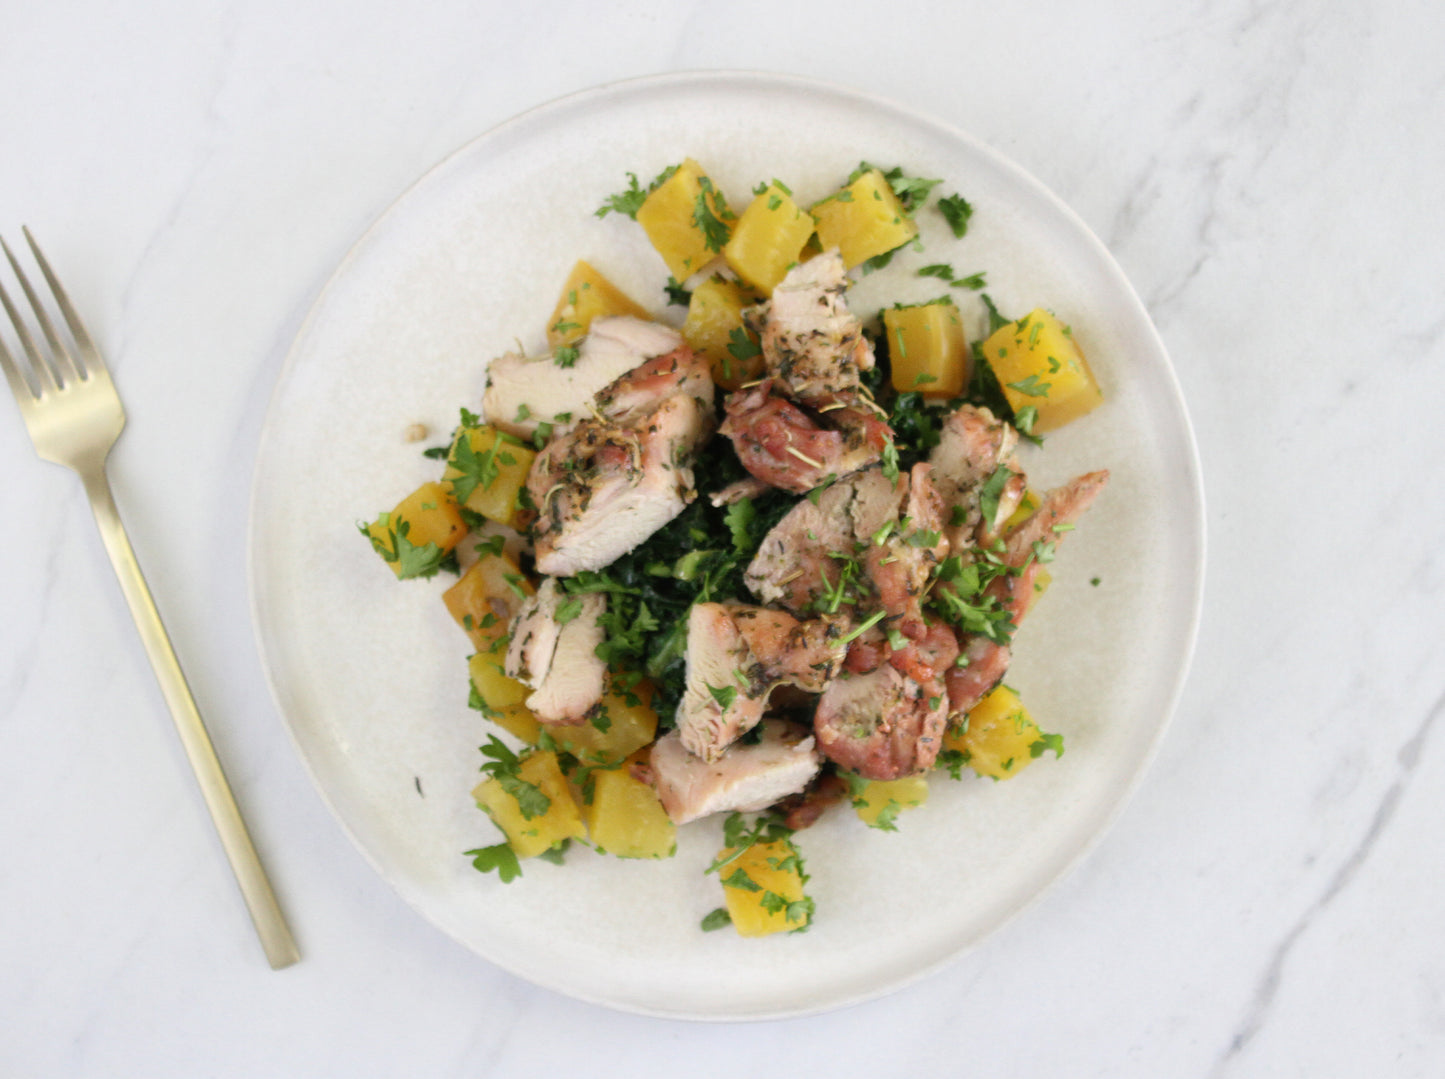 -Herbed Chicken with Marinated Golden Beets & Kale